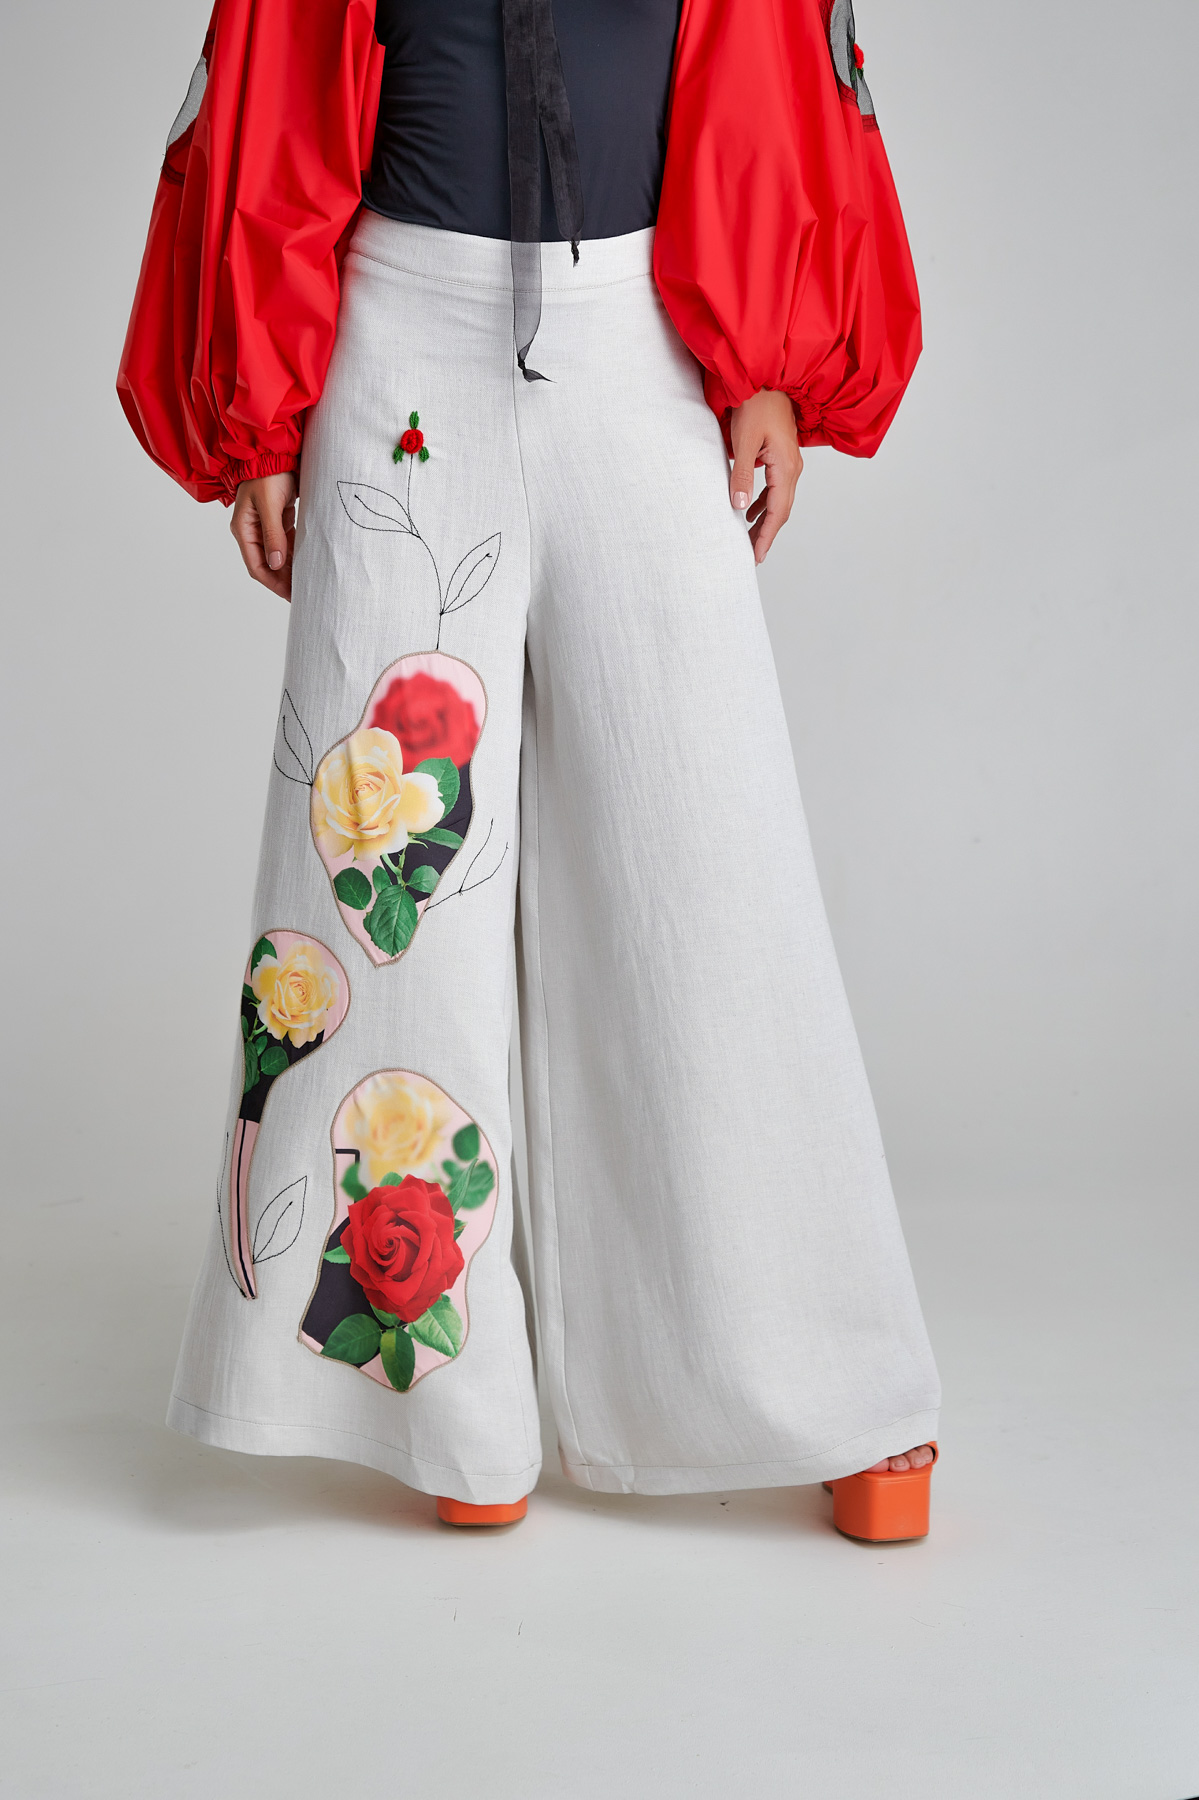 MILES flared linen trousers with floral applications. Natural fabrics, original design, handmade embroidery